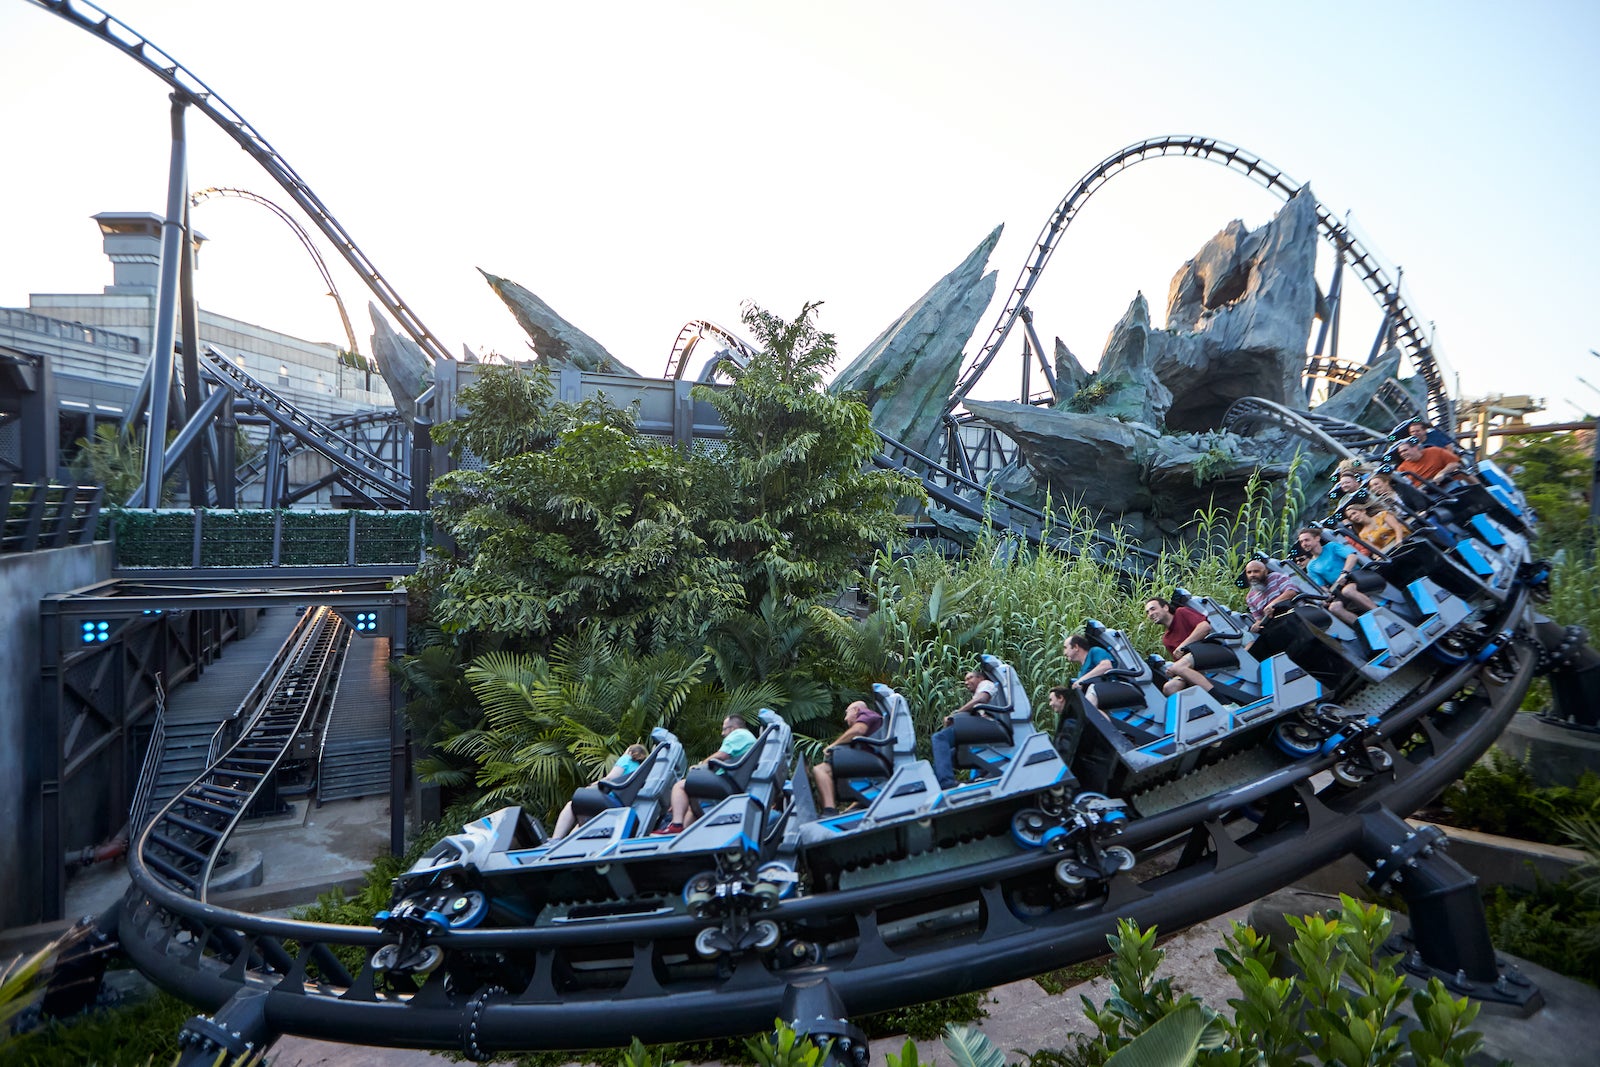 I Waited 2 Hours To Ride The New Jurassic World Velocicoaster At Universal Orlando — And It Was 